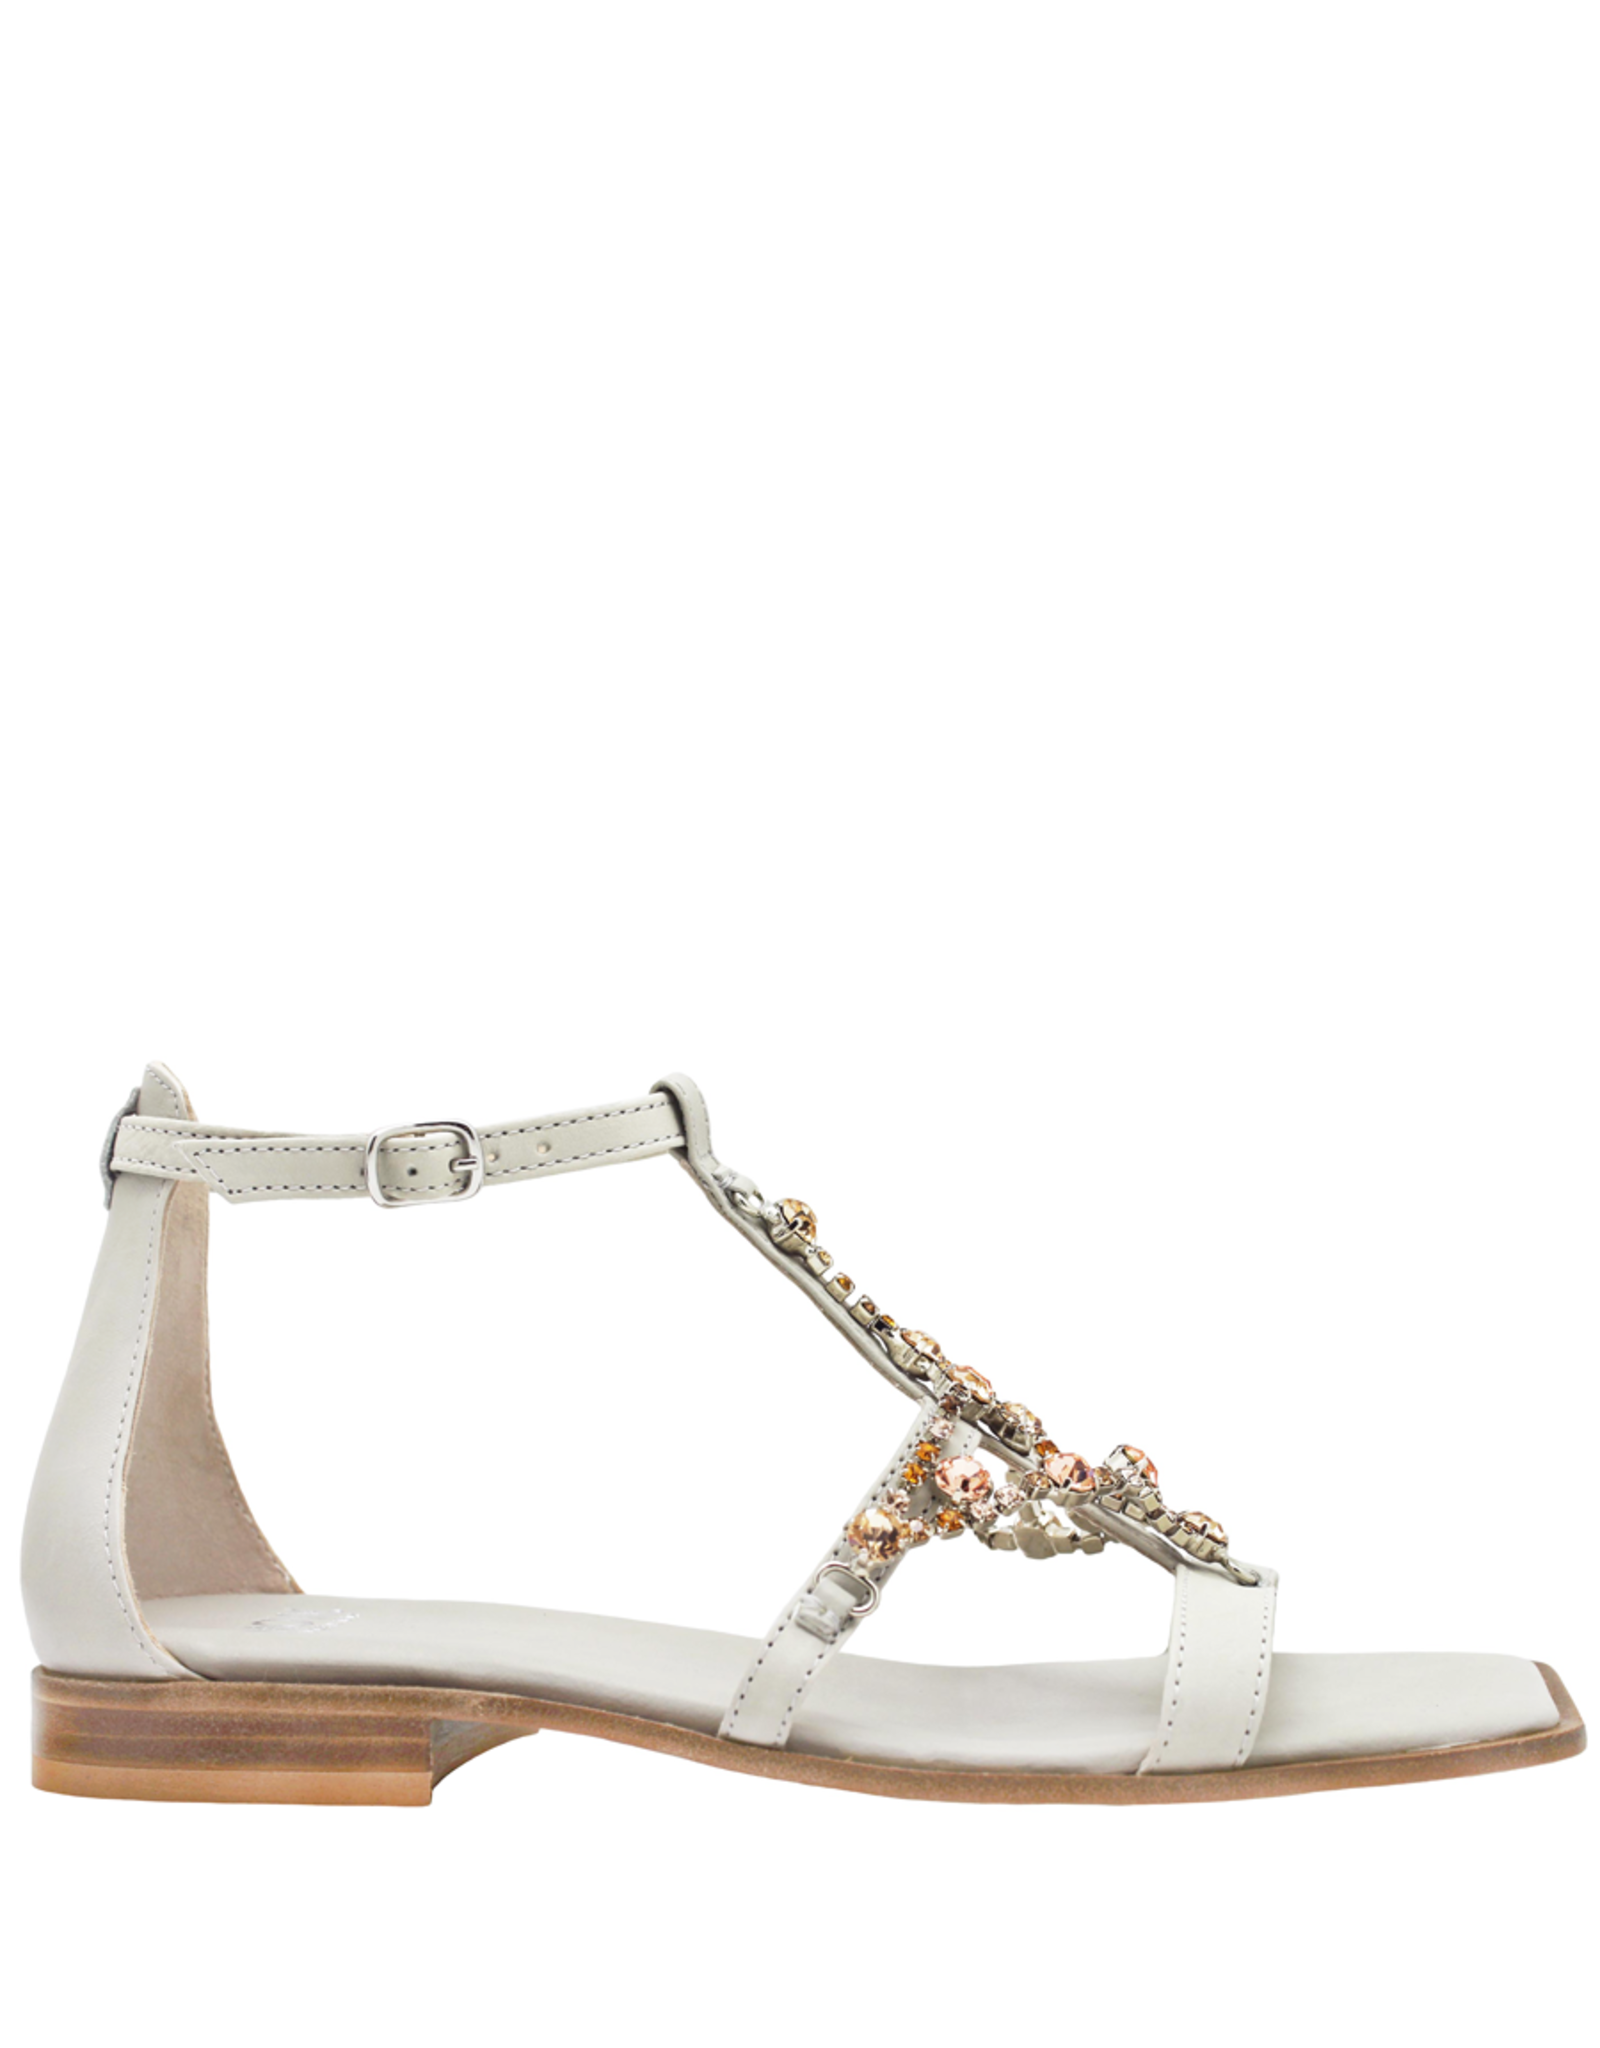 Now Now Ice Sandal with Crystals 7540